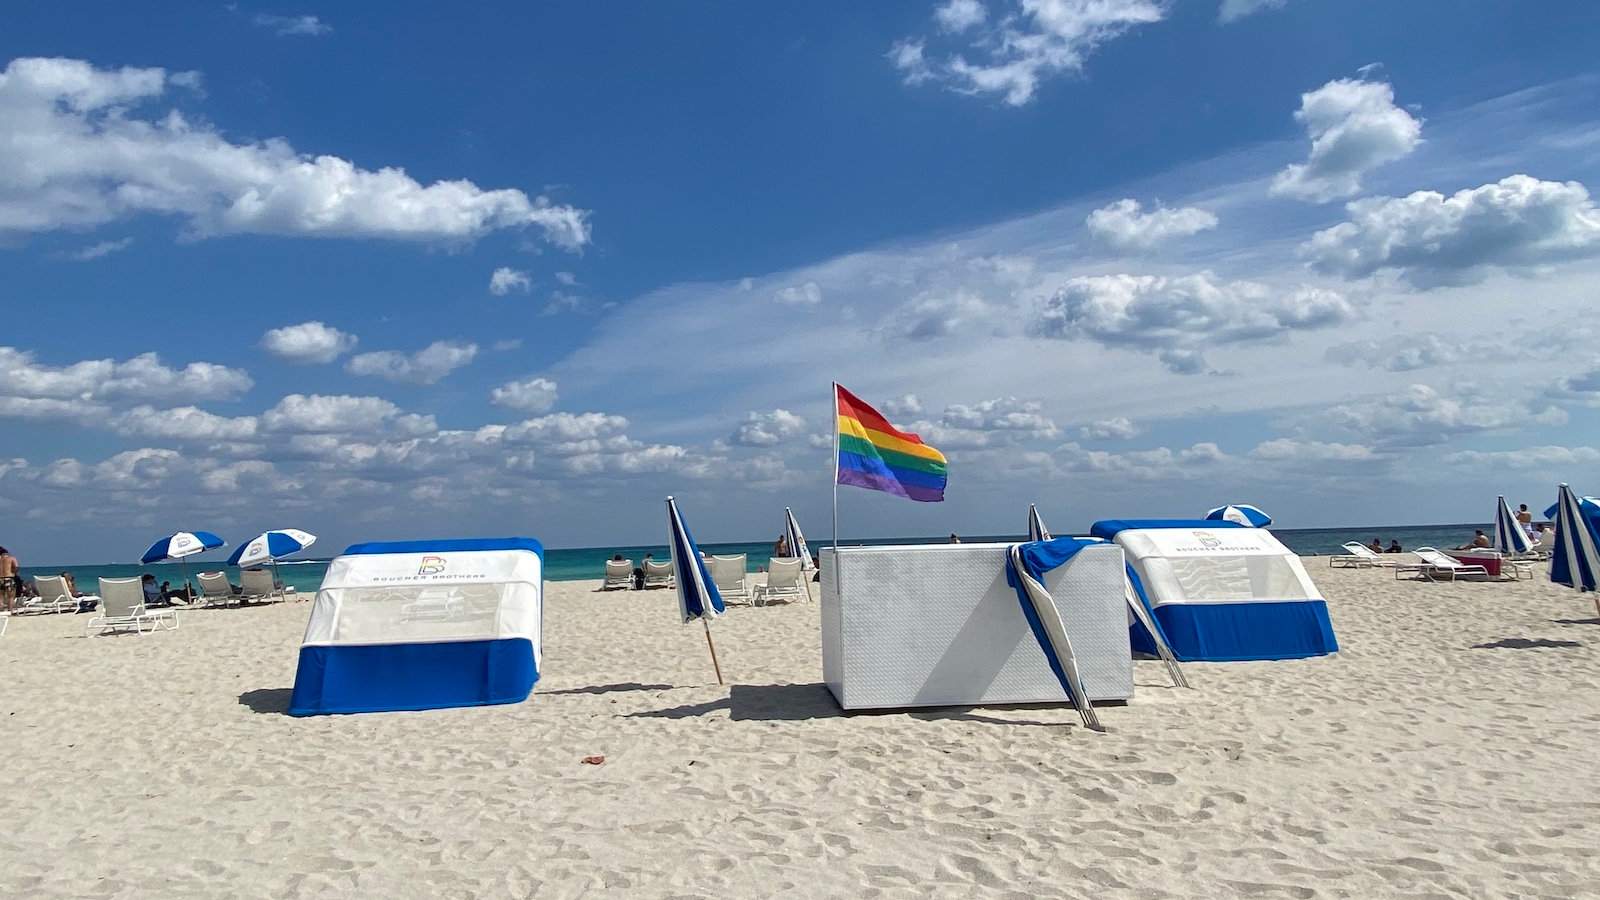 Even if you're not staying at the AxelBeach Miami Hotel, you can still enjoy their private gay beach